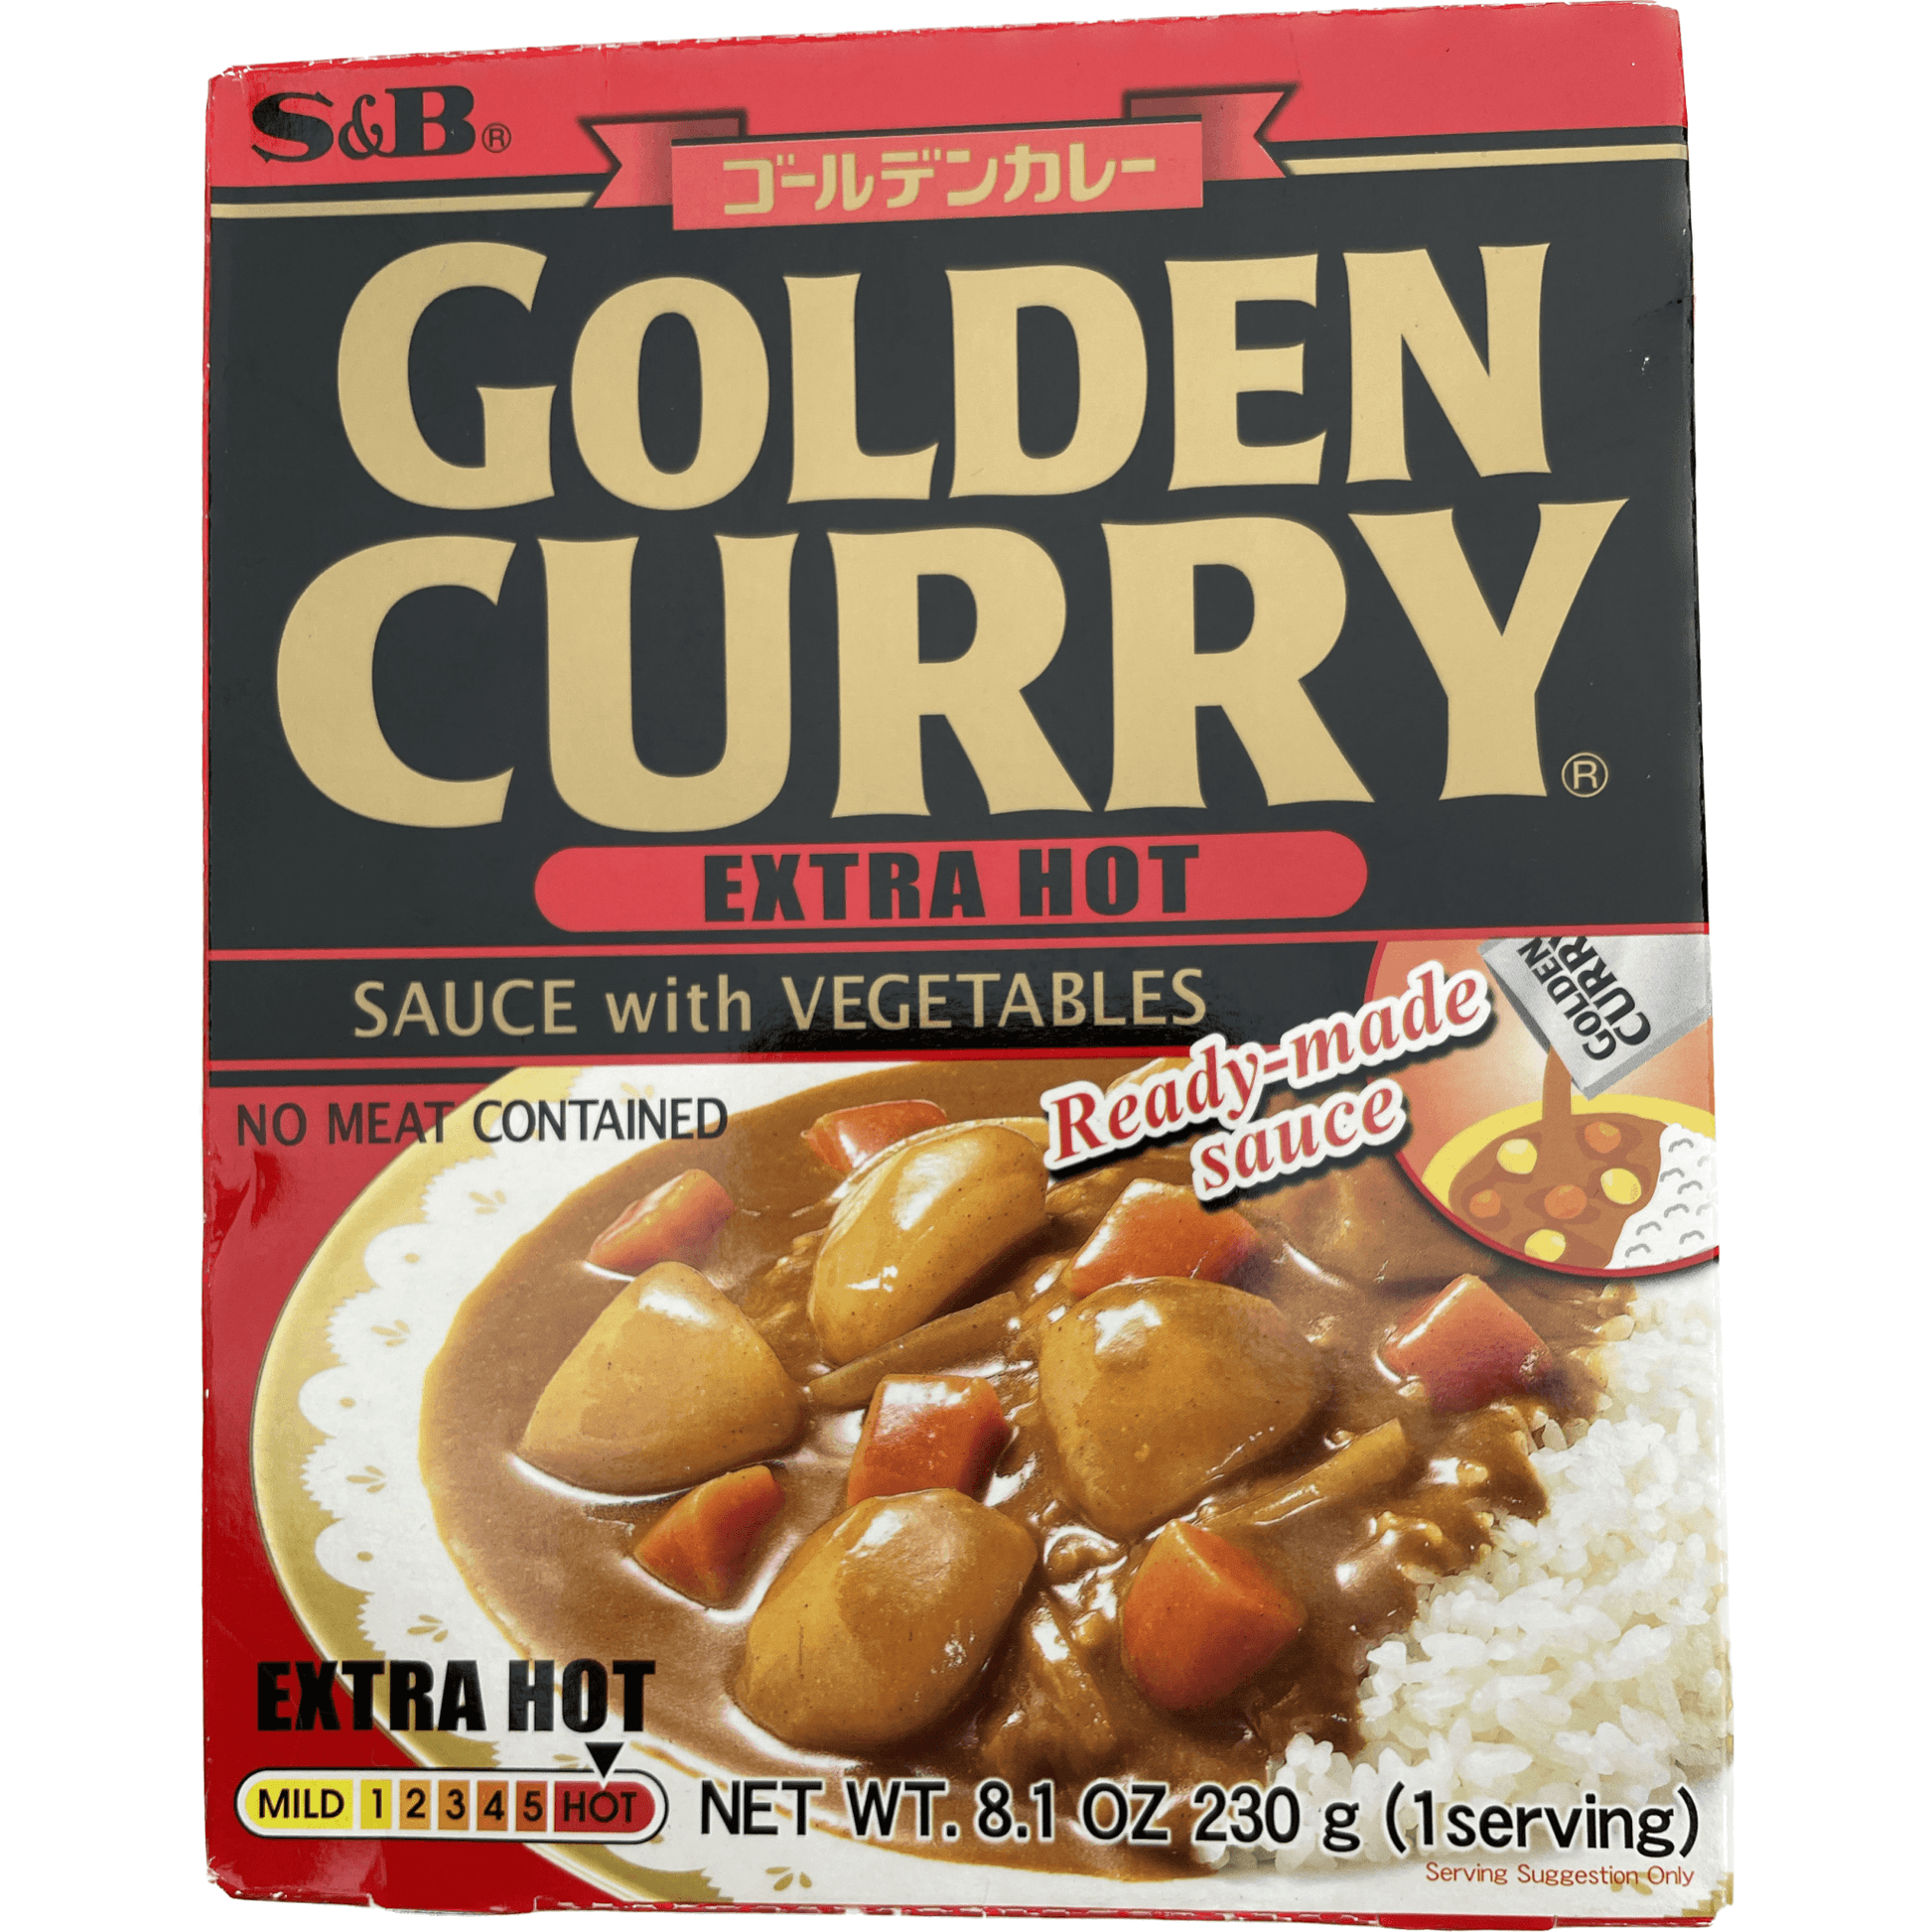 S&B Golden Curry (Very Spicy) S&B　ゴールデンカレー　大辛　＜レトルト＞　230g - RiceWineShop